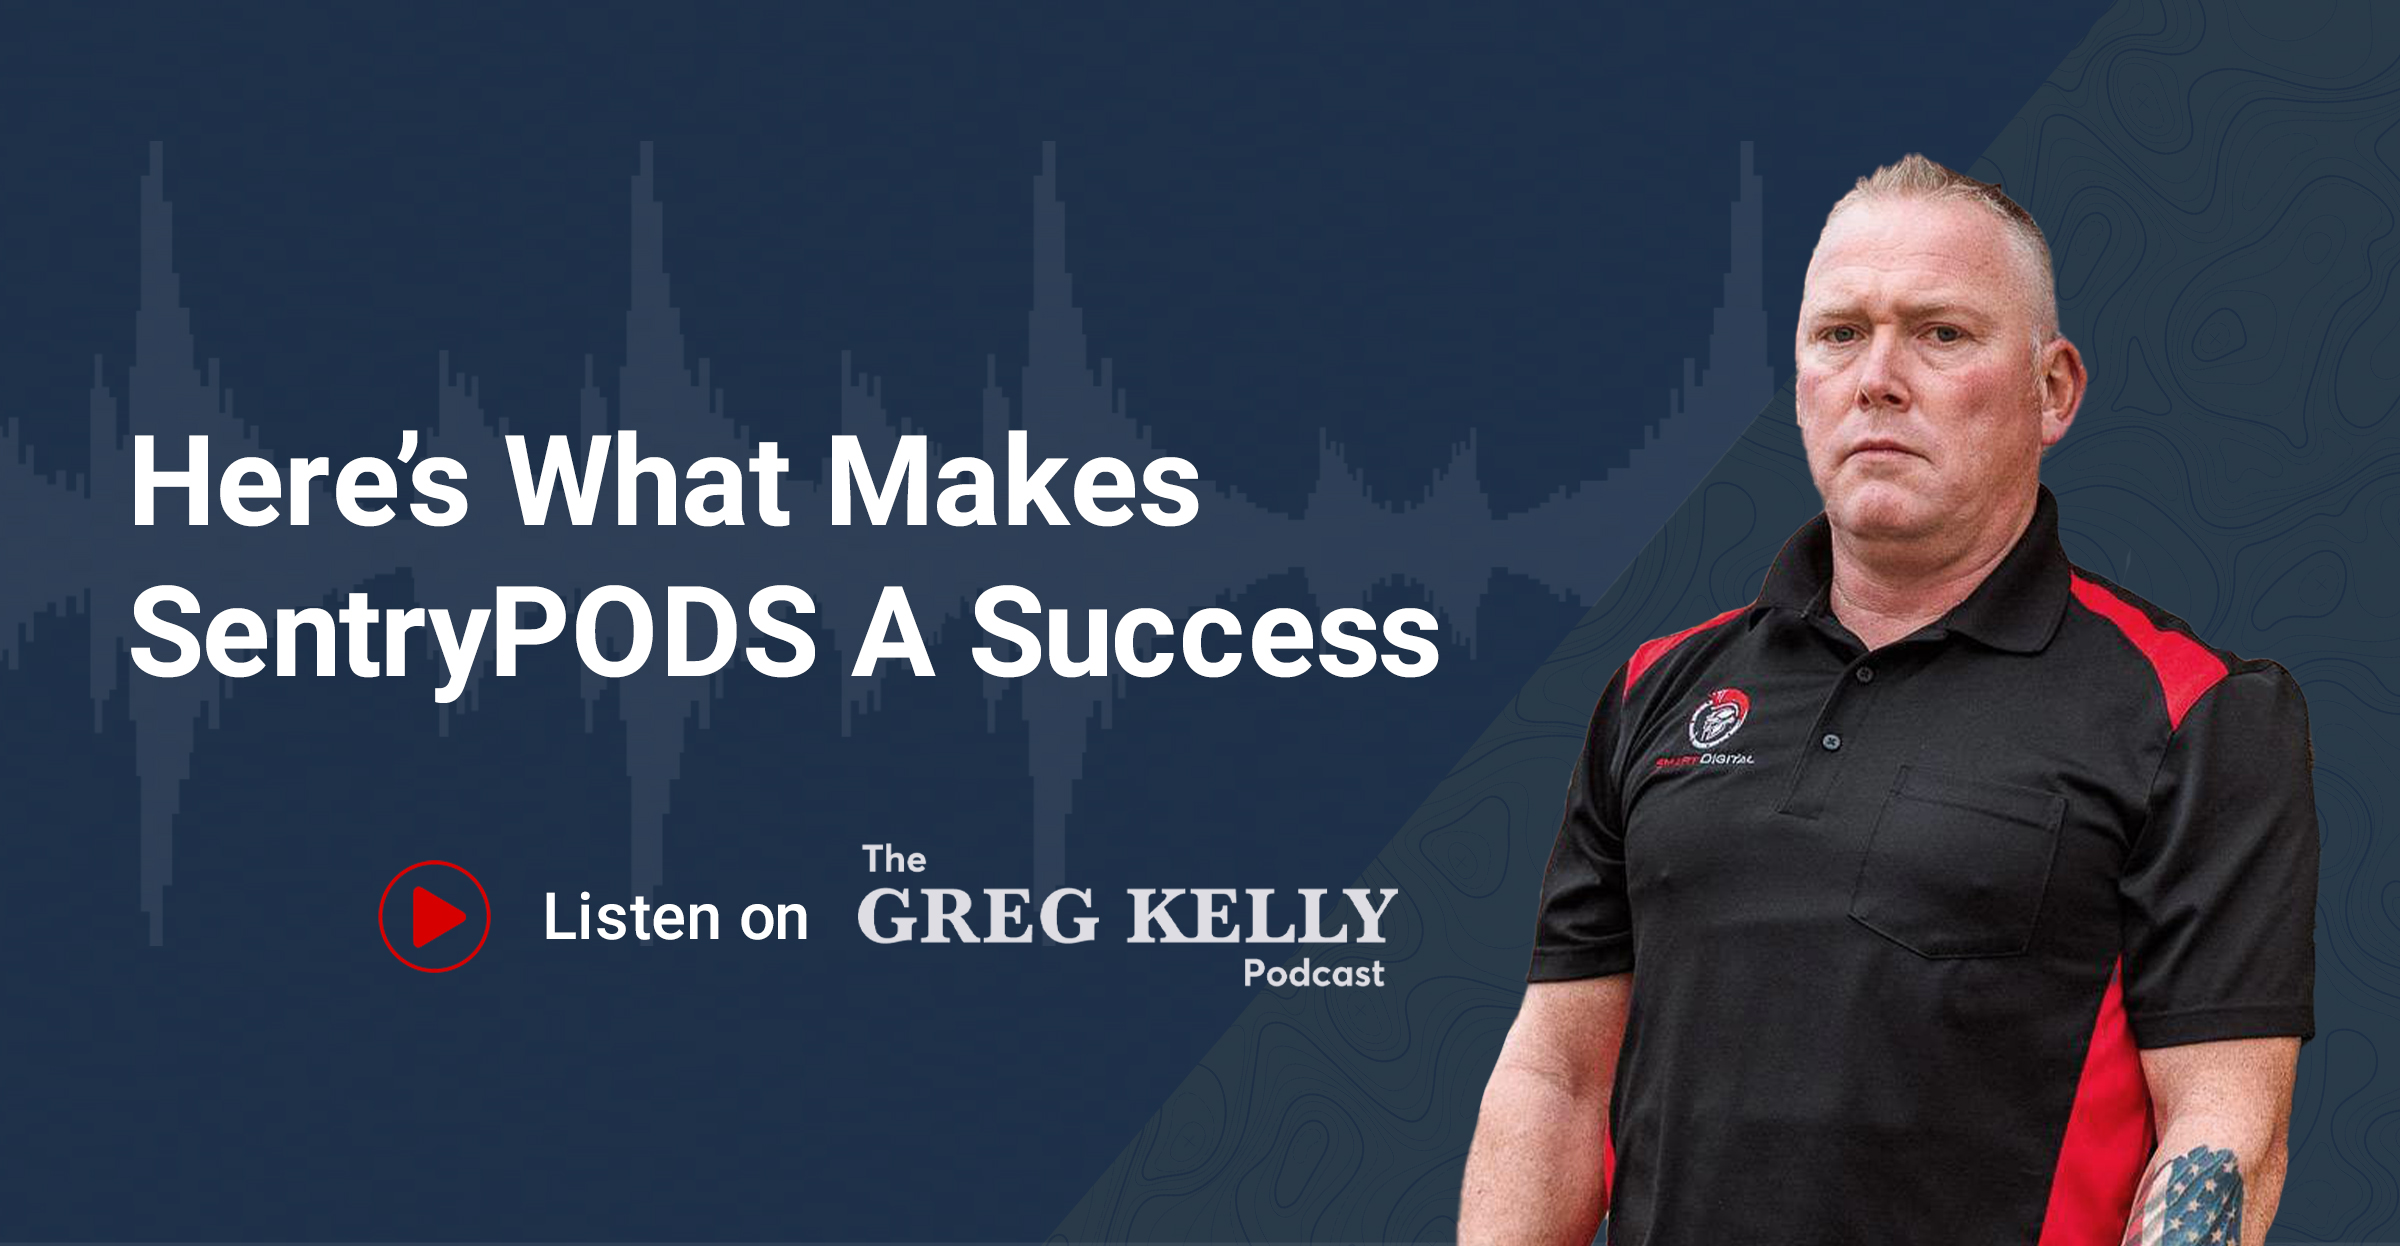 Greg Kelly - What Make SentryPODS A Success